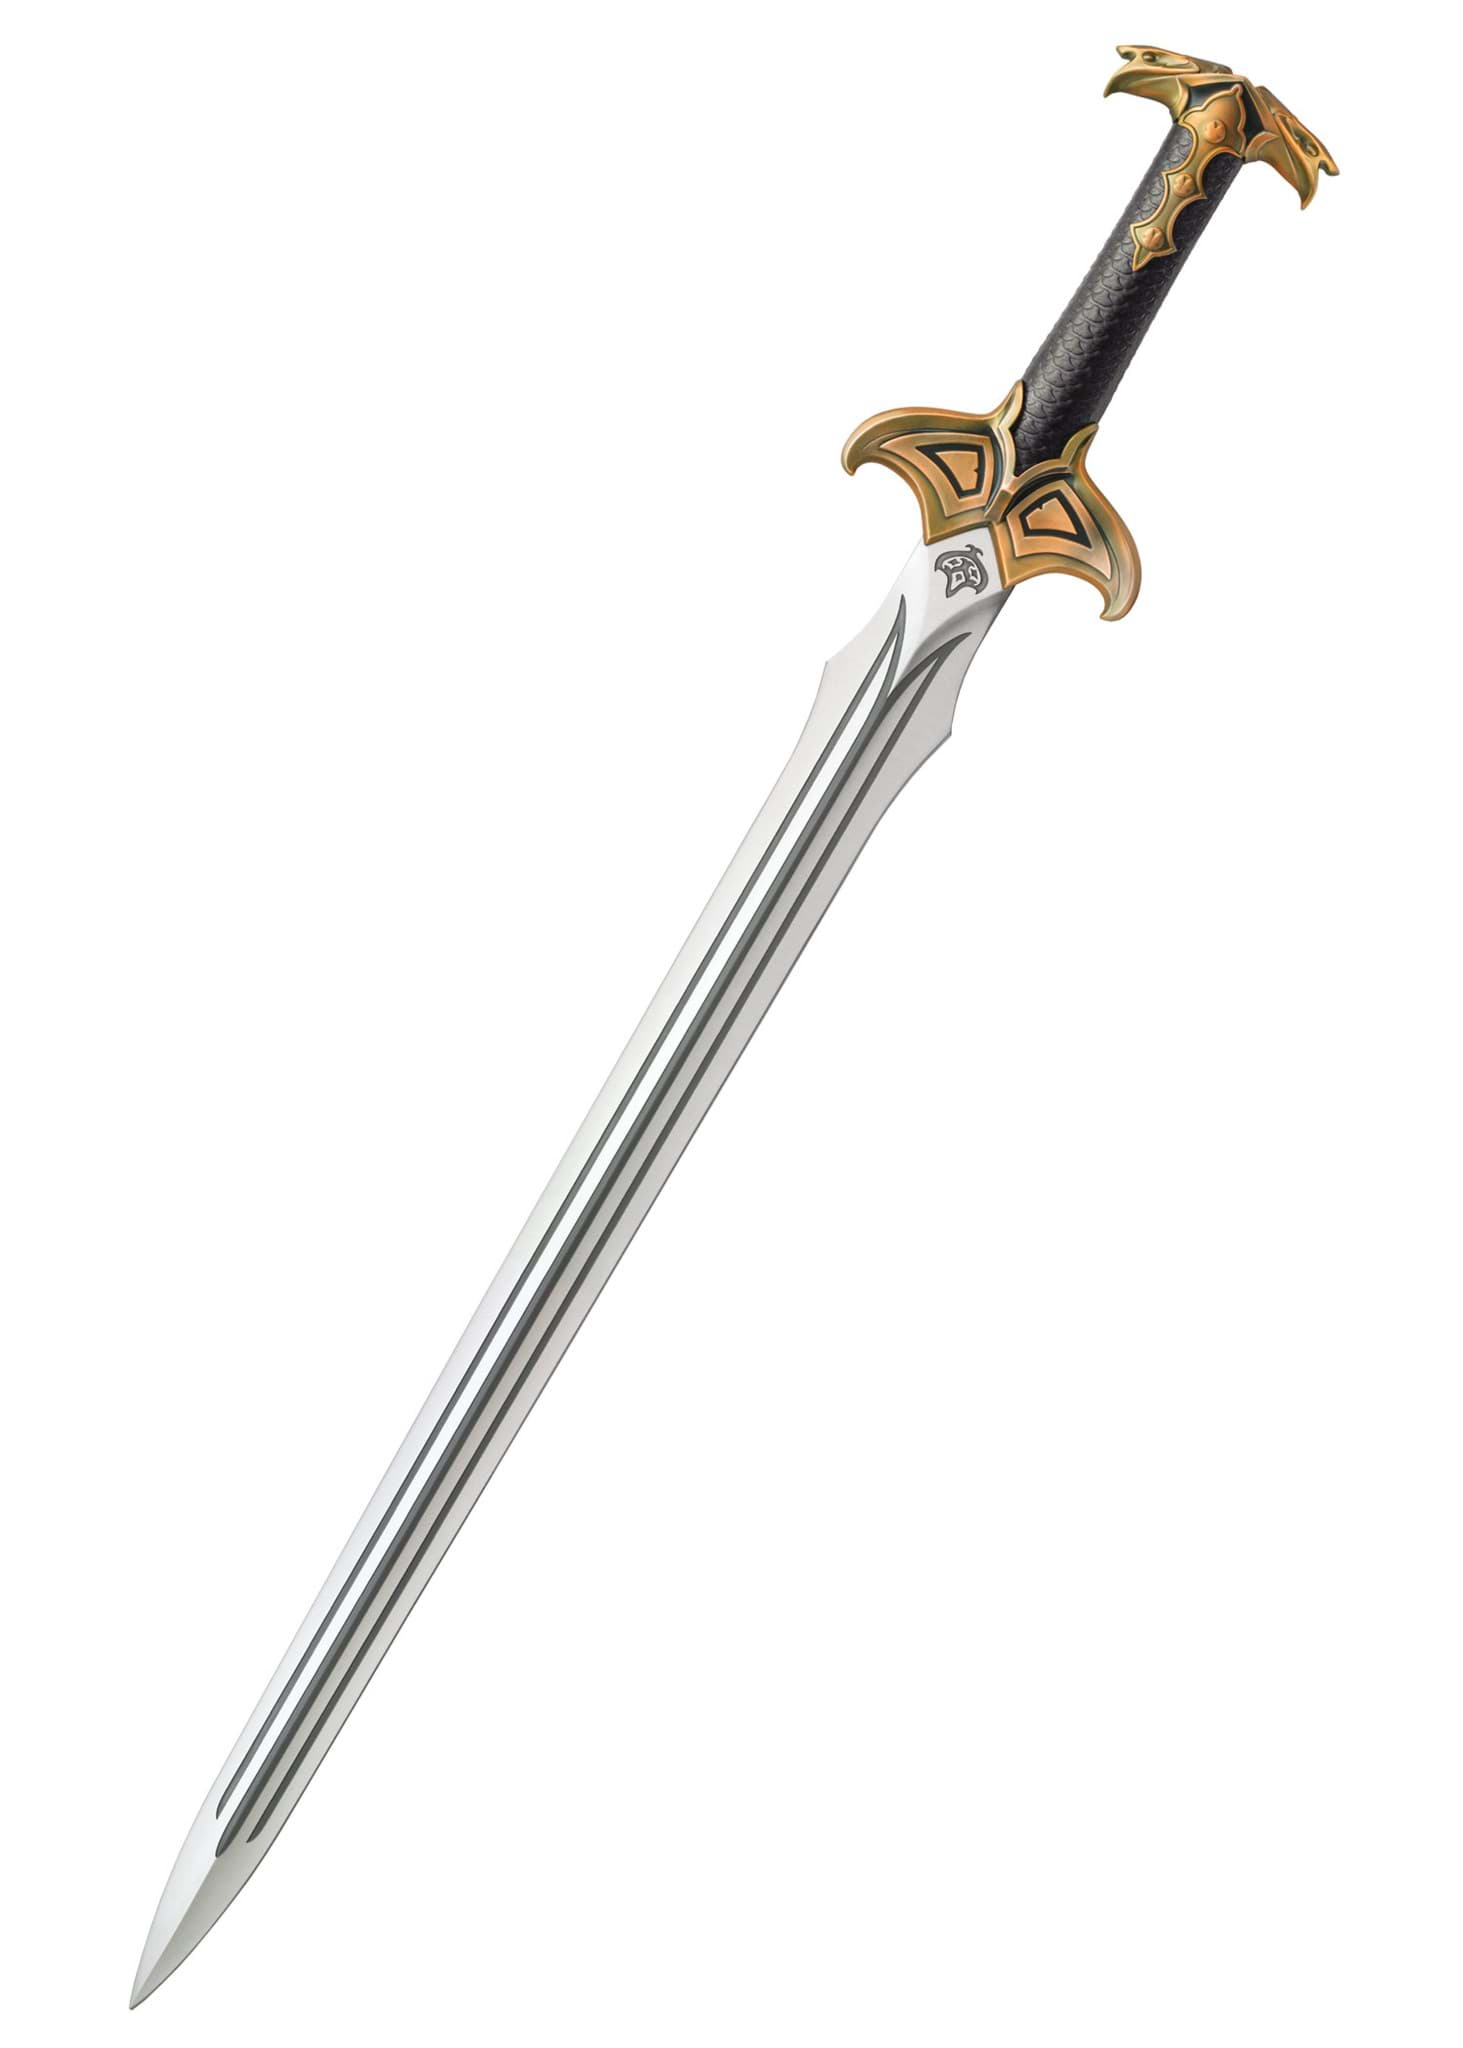 Picture of The Hobbit - Sword of Bard the Bowman